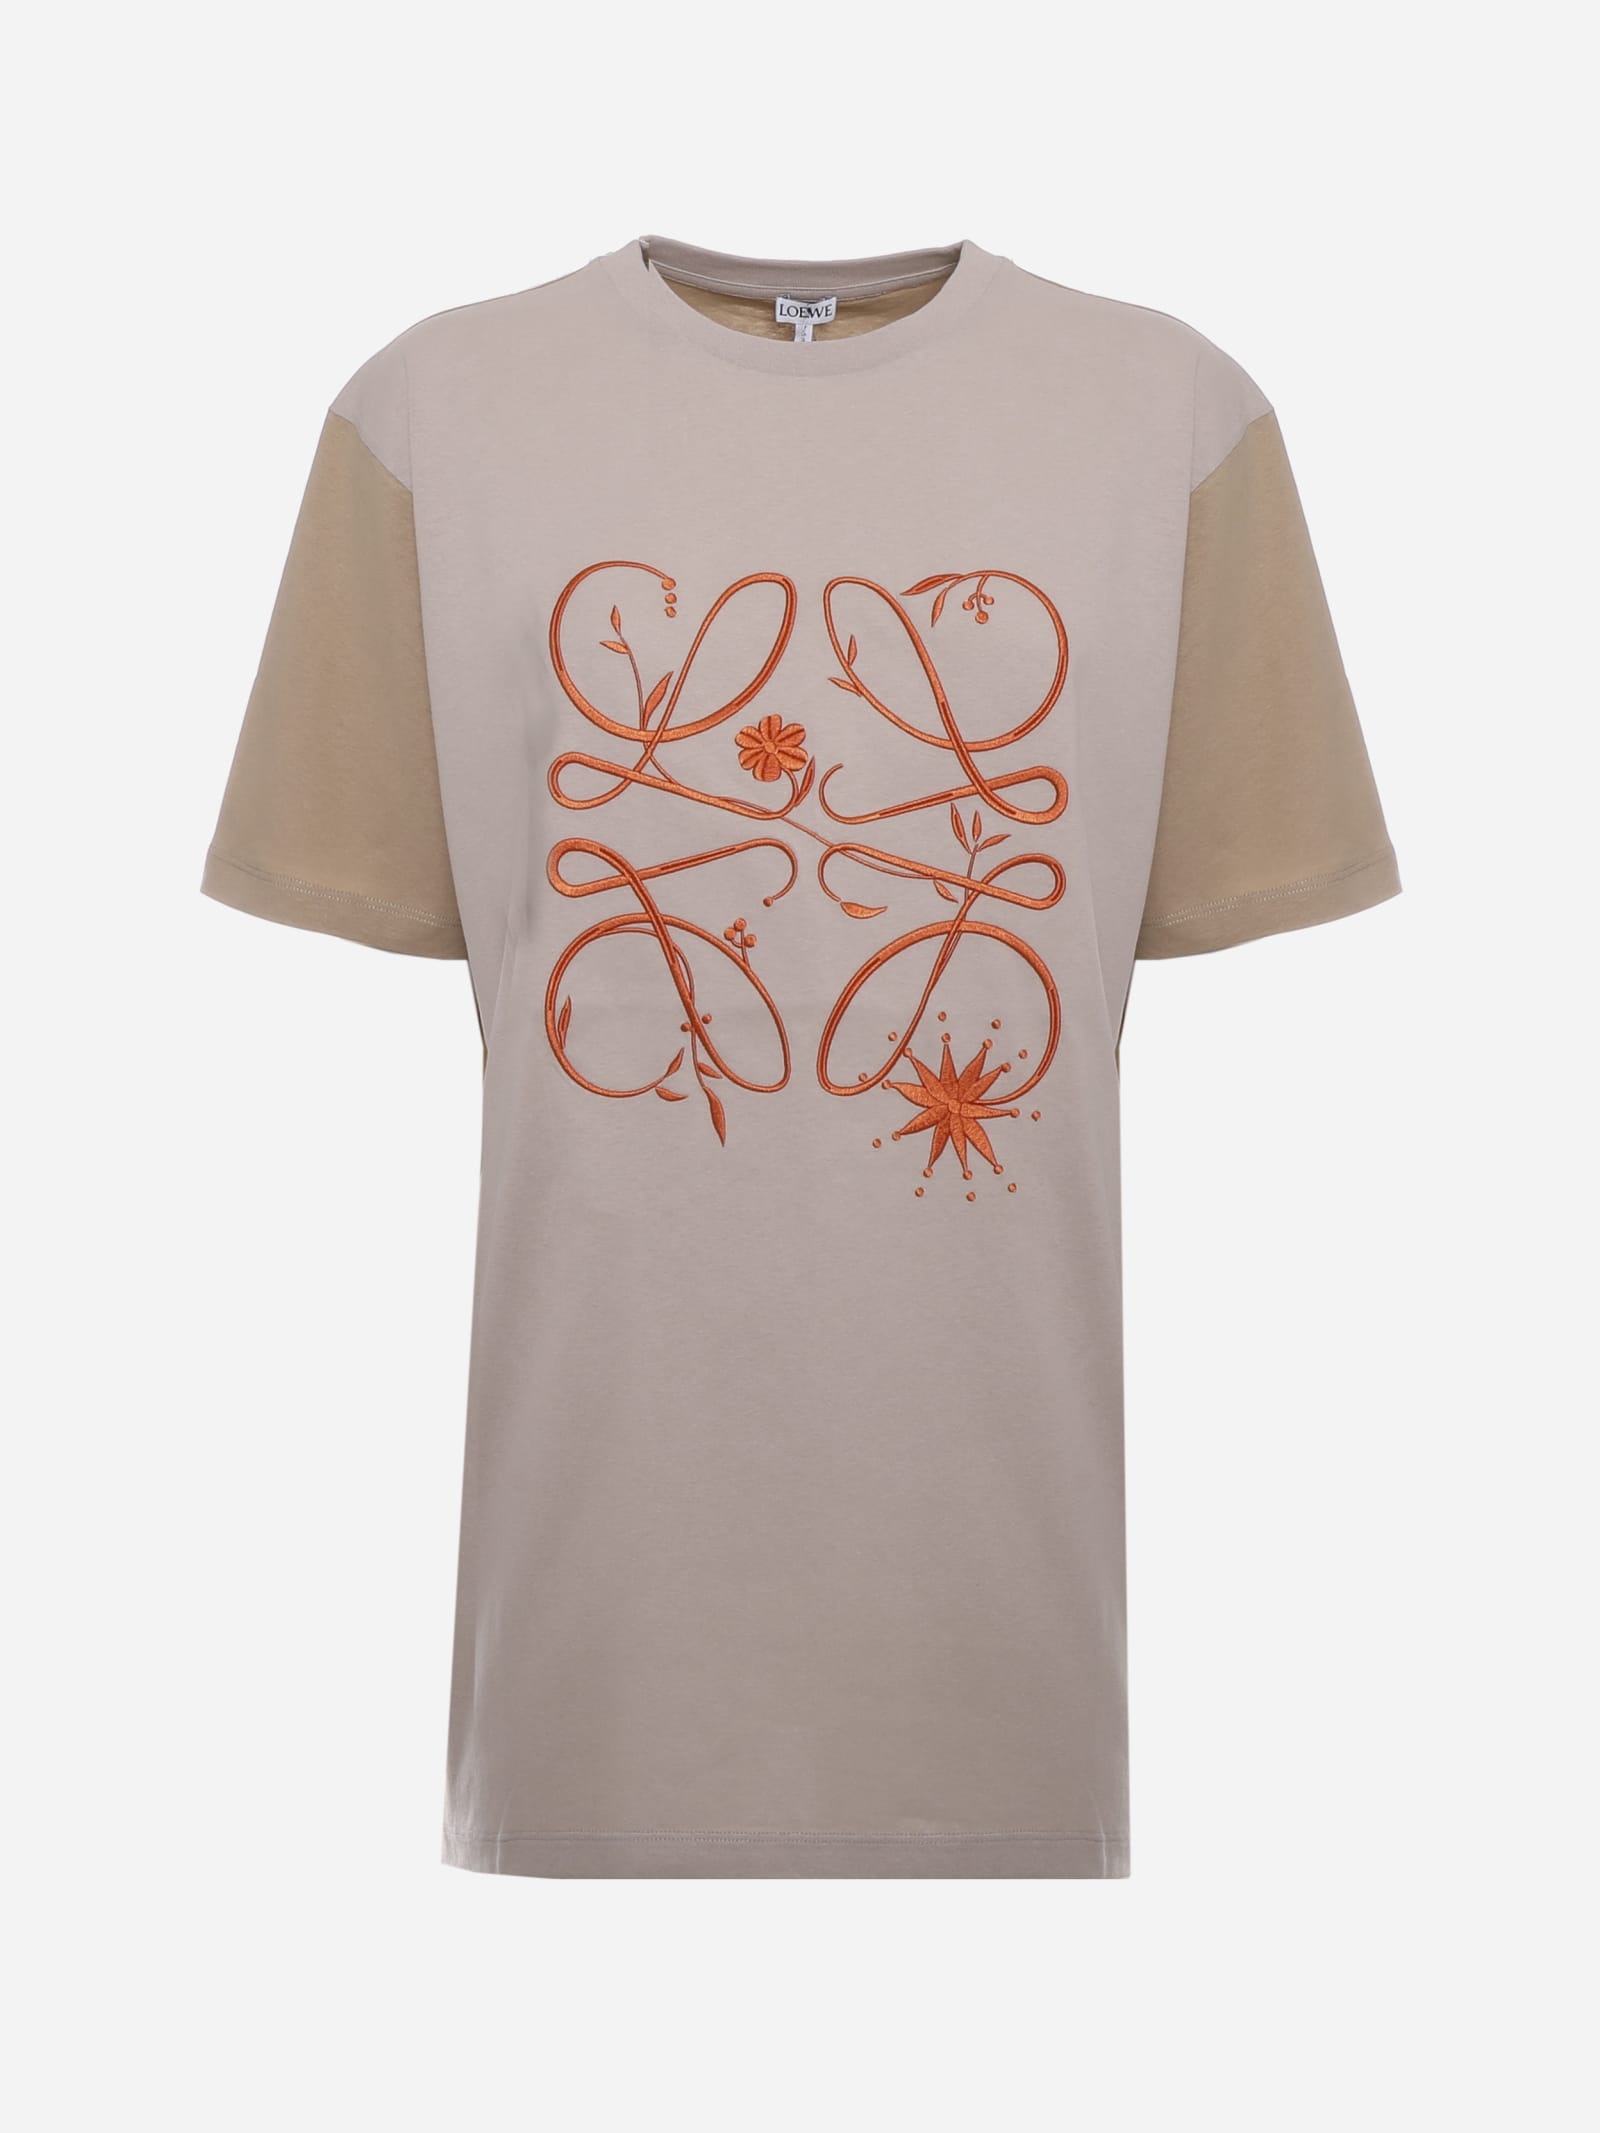 Loewe Cotton T-shirt With Contrasting Anagram Print